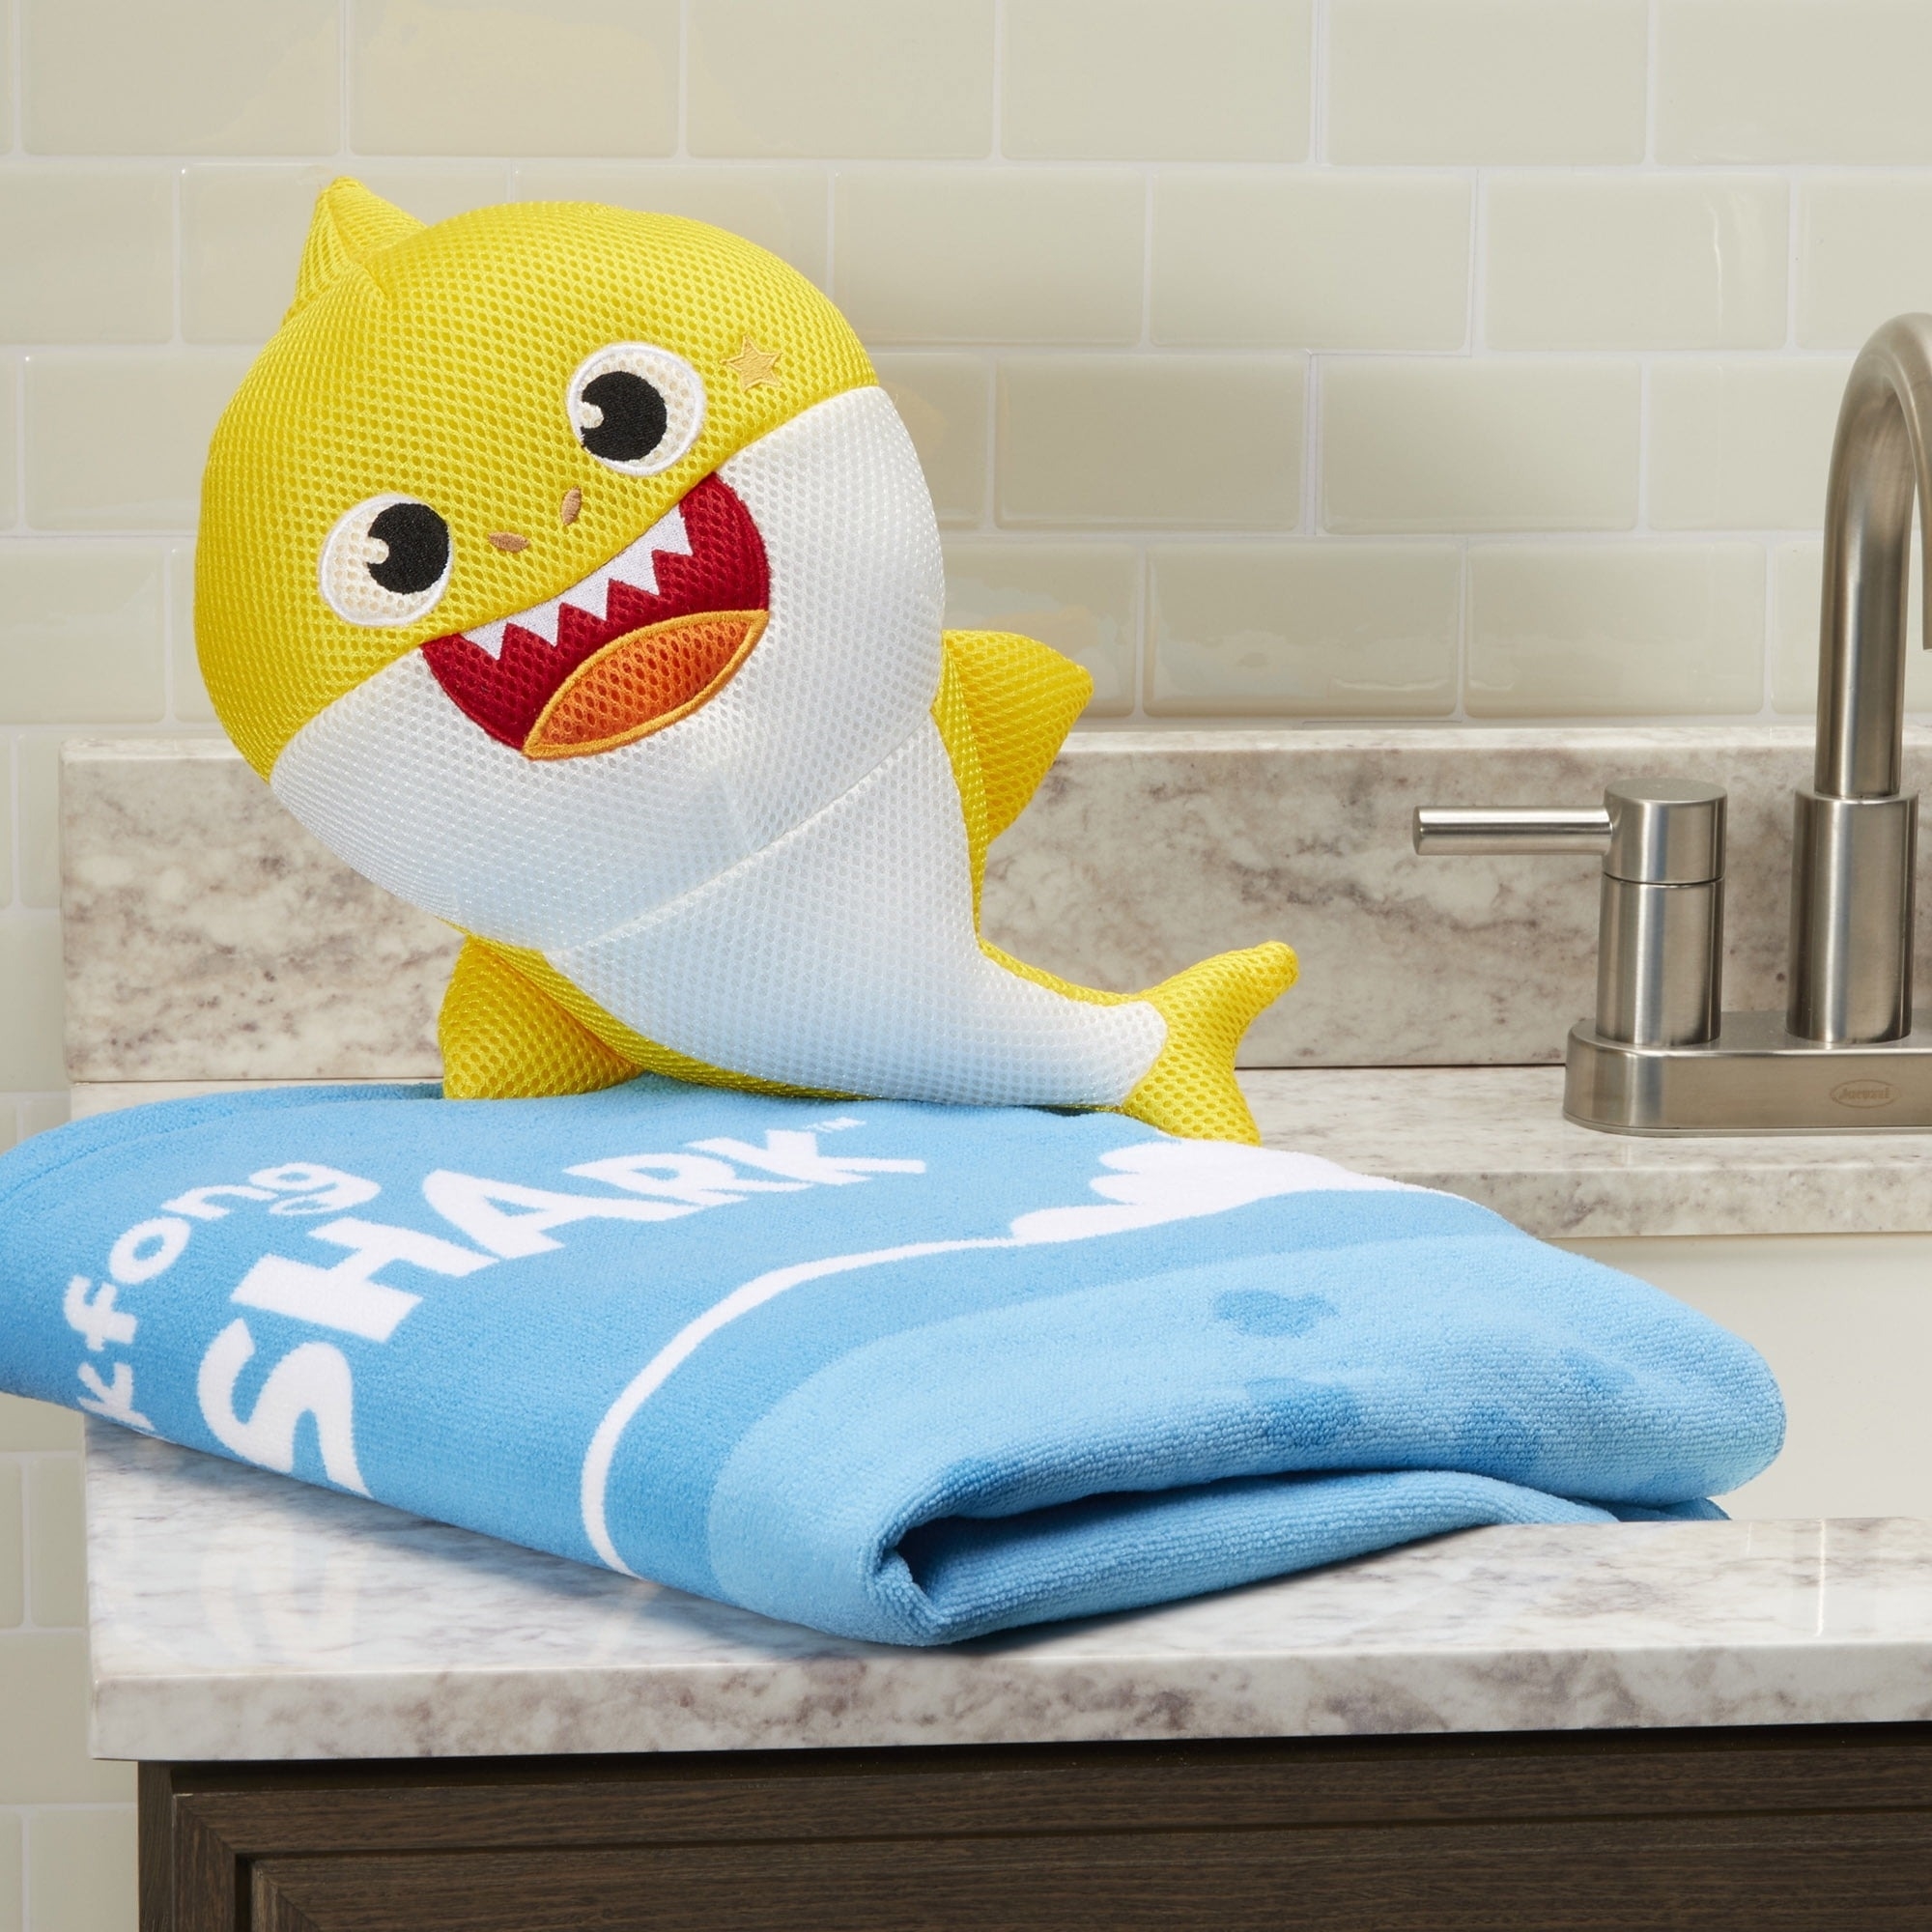 Baby Shark scrubby and towel